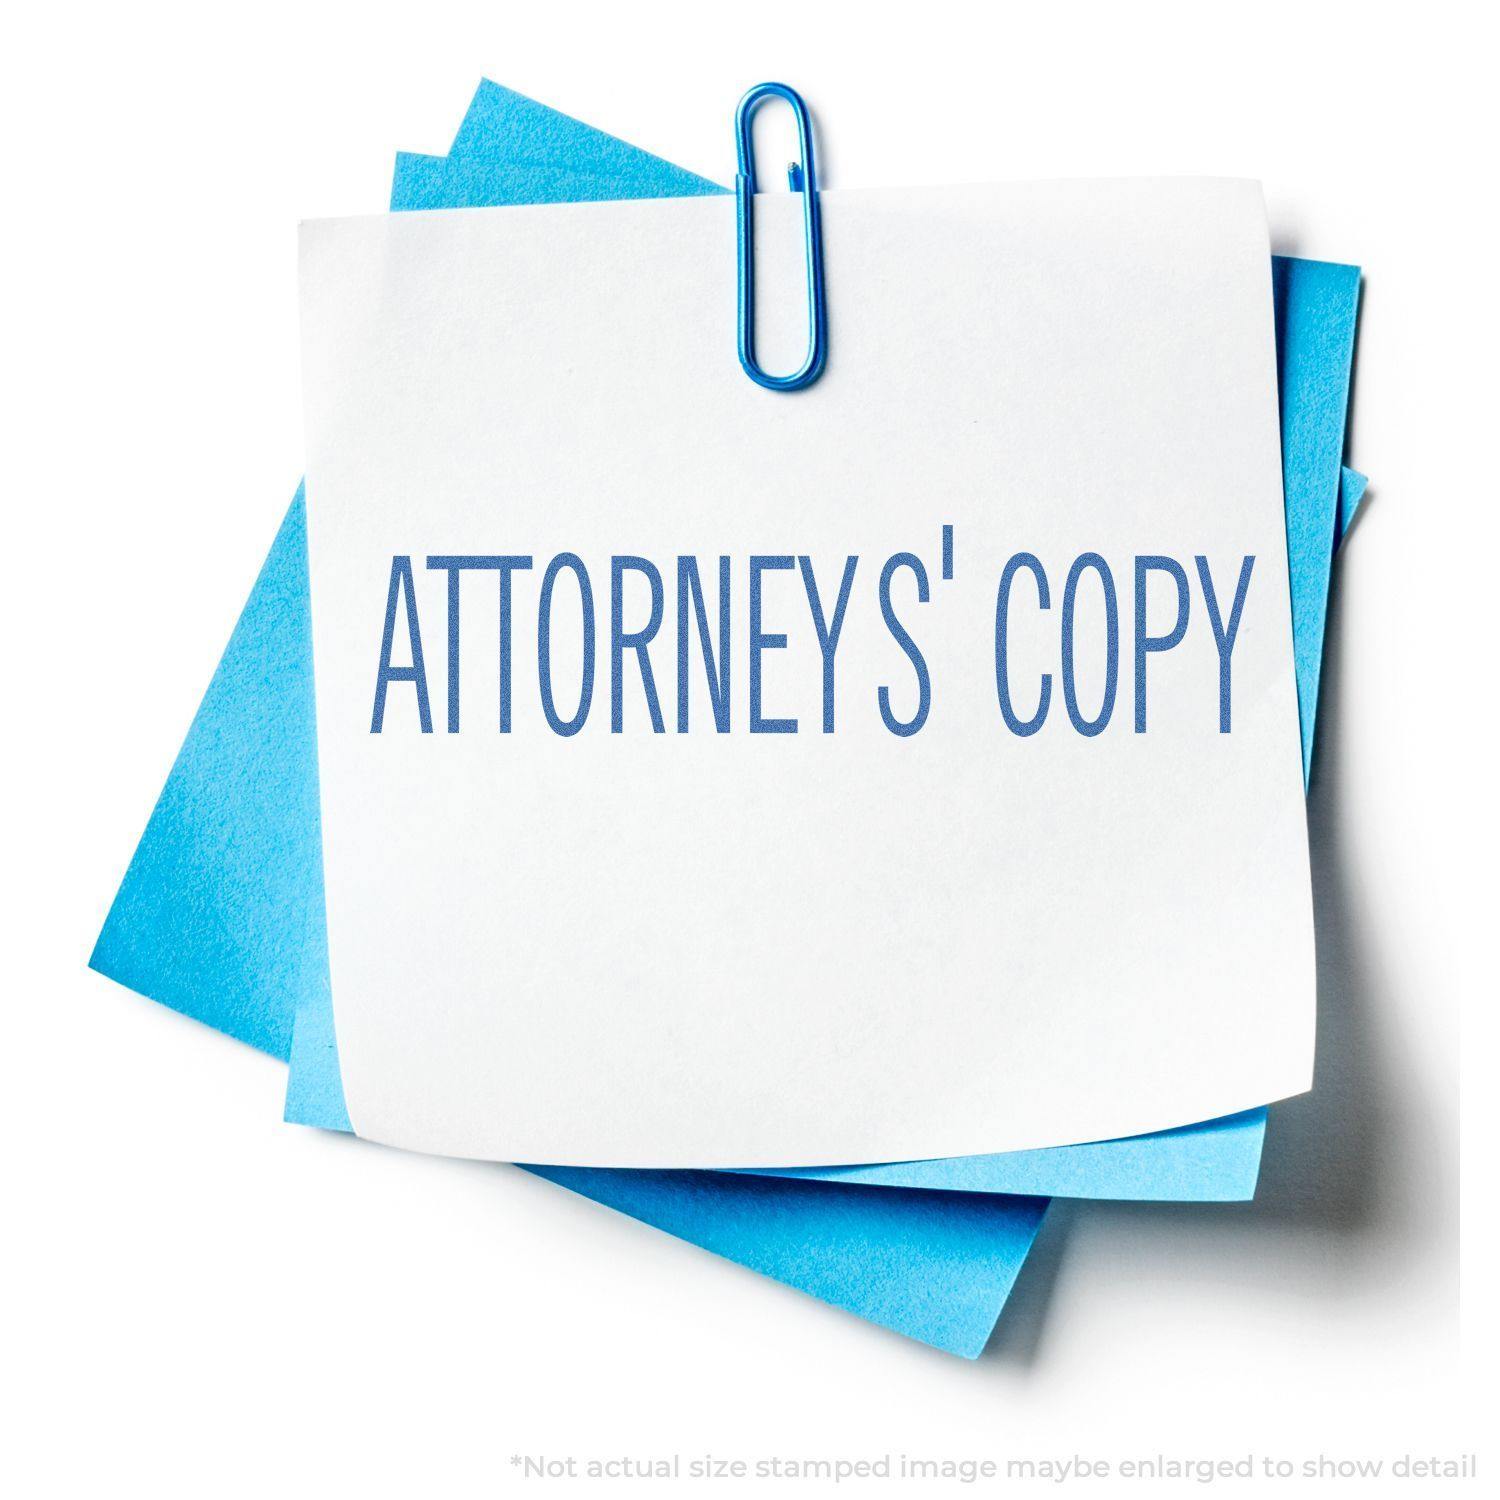 In Use Photo of Attorney's Copy Xstamper Stamp